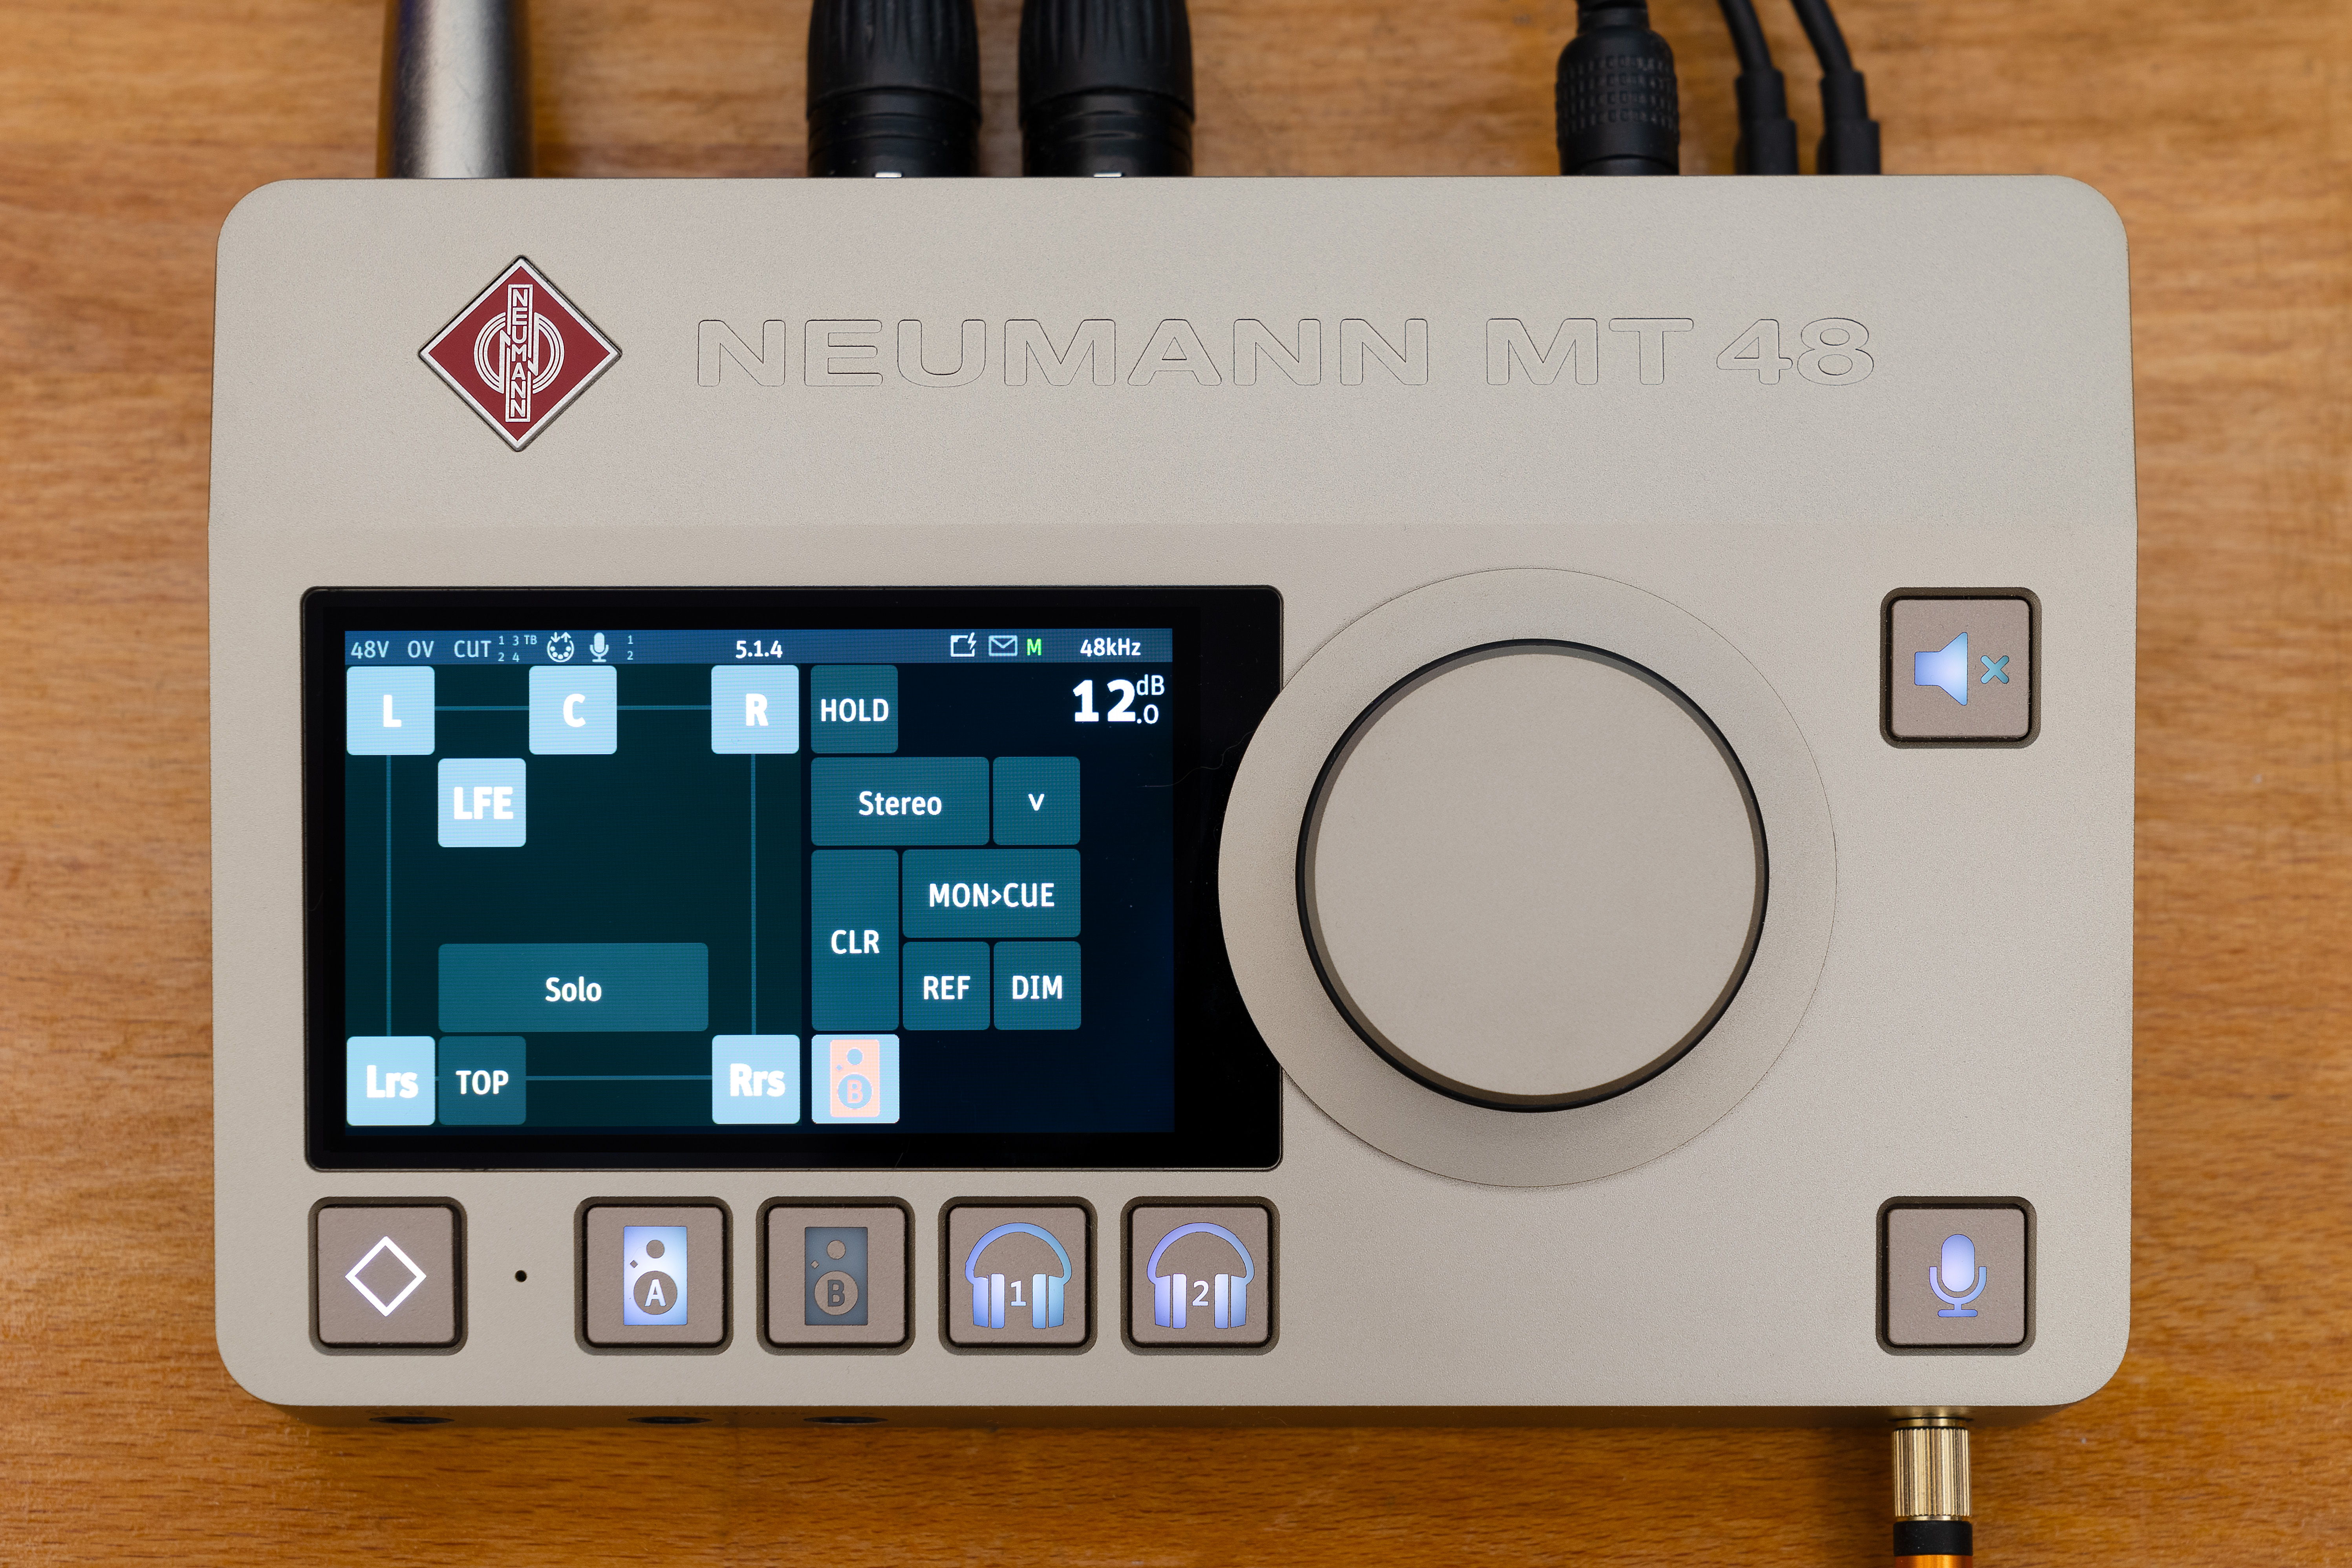 With the new feature update, the Neumann MT 48 audio interface will allow working in immersive audio formats